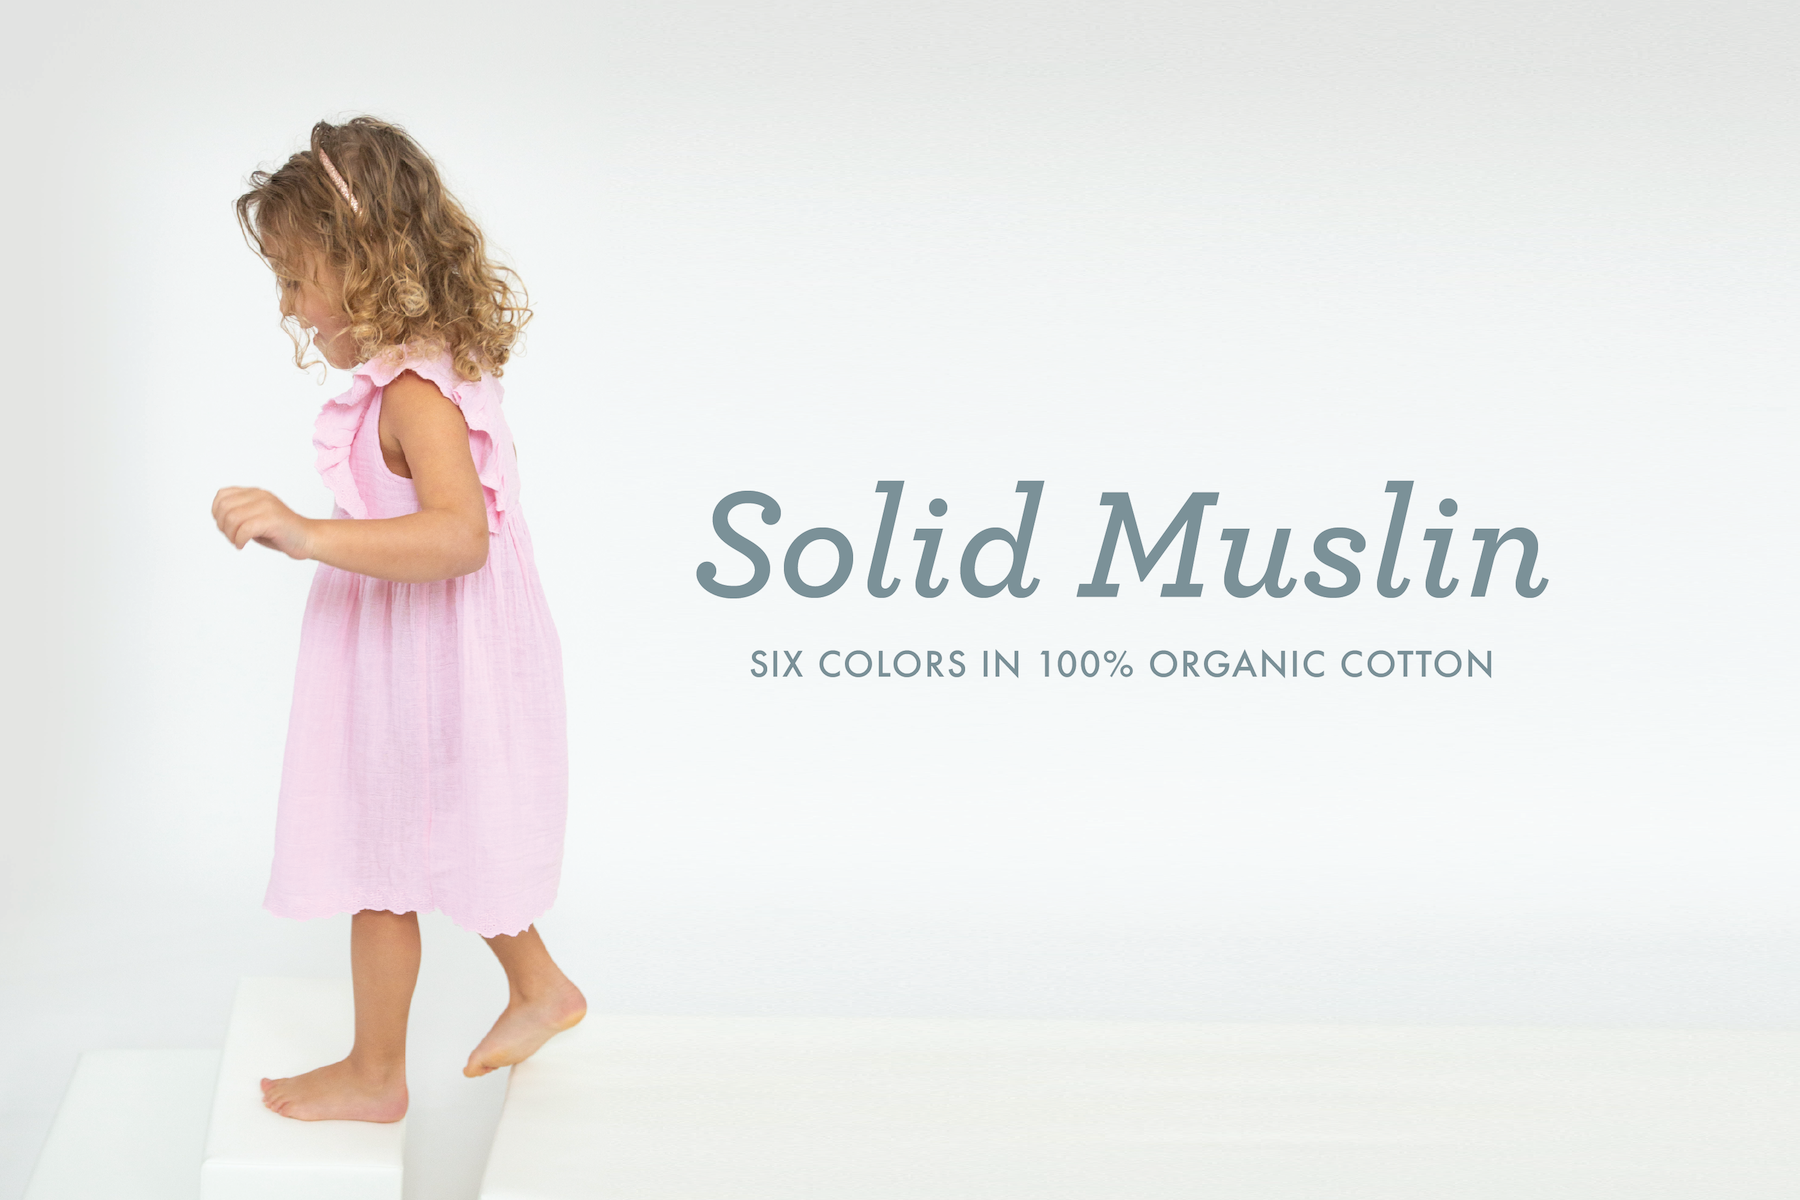 girl with curly hair in a pink dress walking on white block. Text says Solid Muslin with six colors in 100% organic cotton